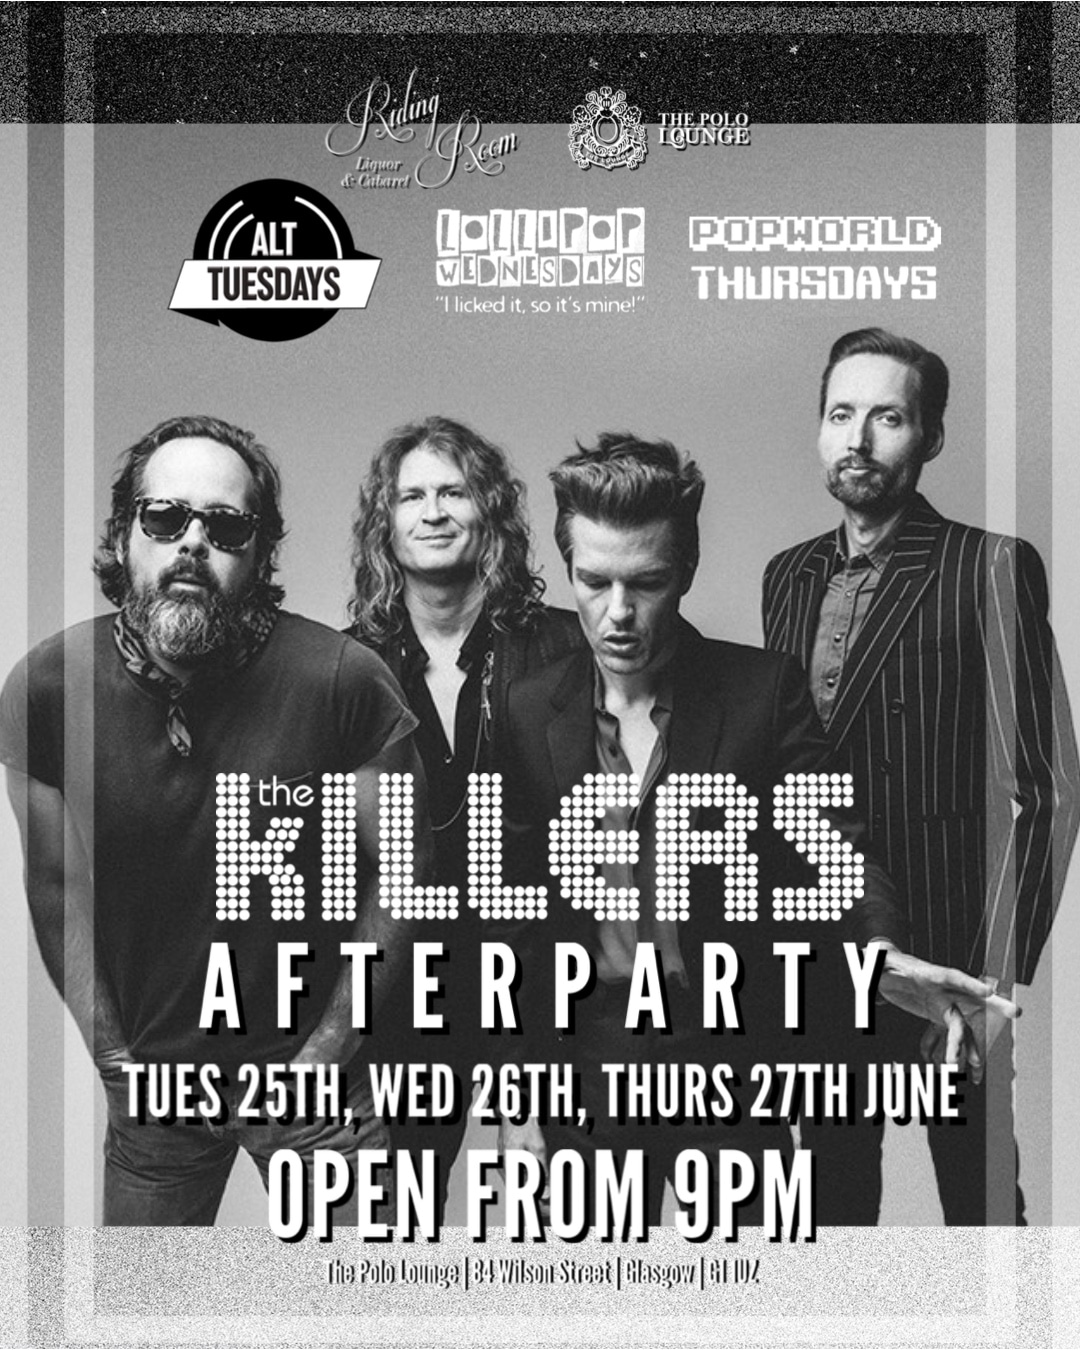 The Killers Afterparty - Polo Lounge